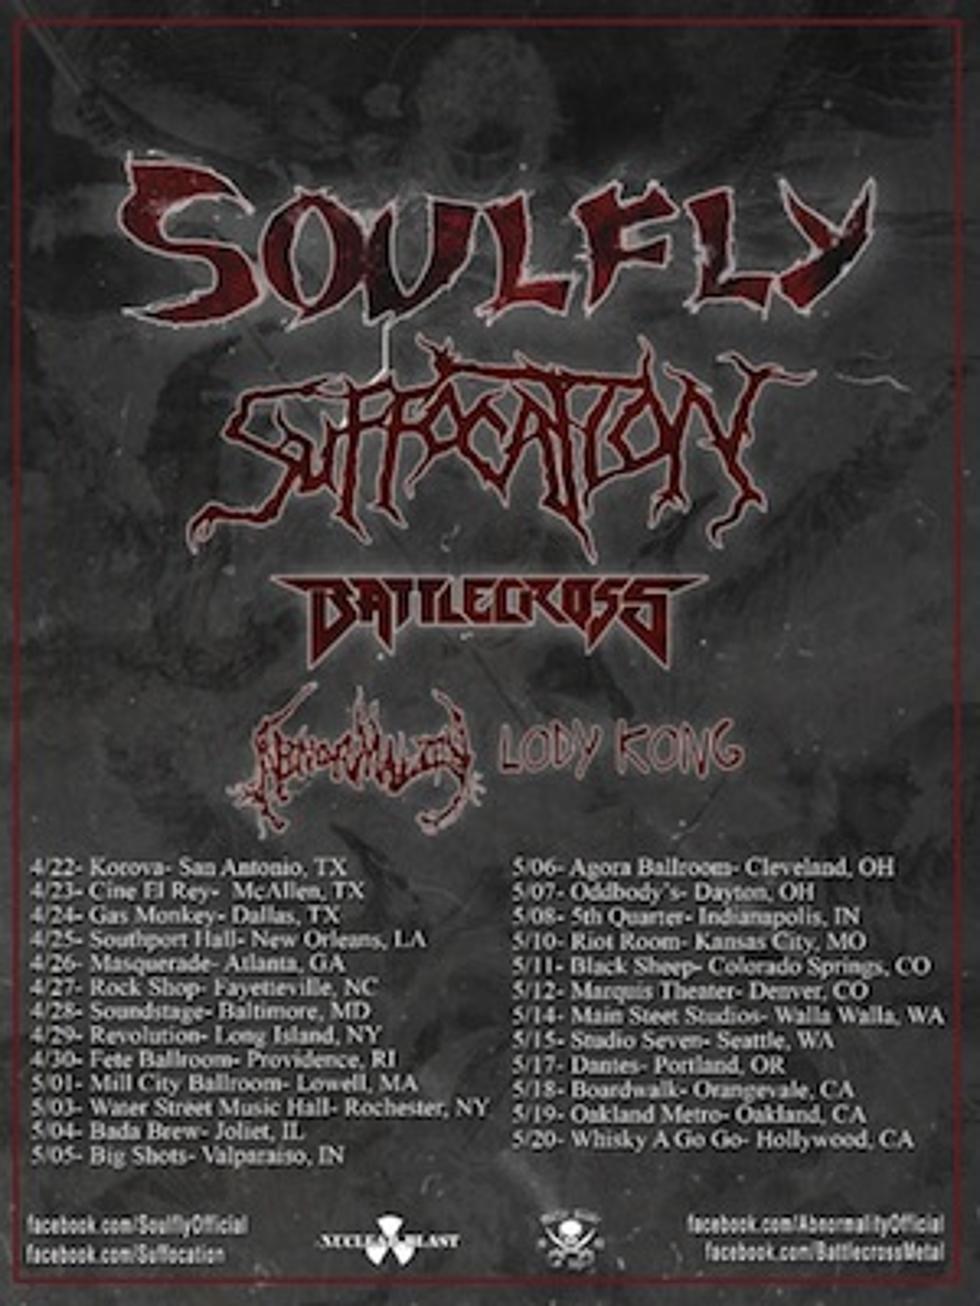 Soulfly to Embark on 2016 U.S. Tour With Suffocation, Battlecross + More